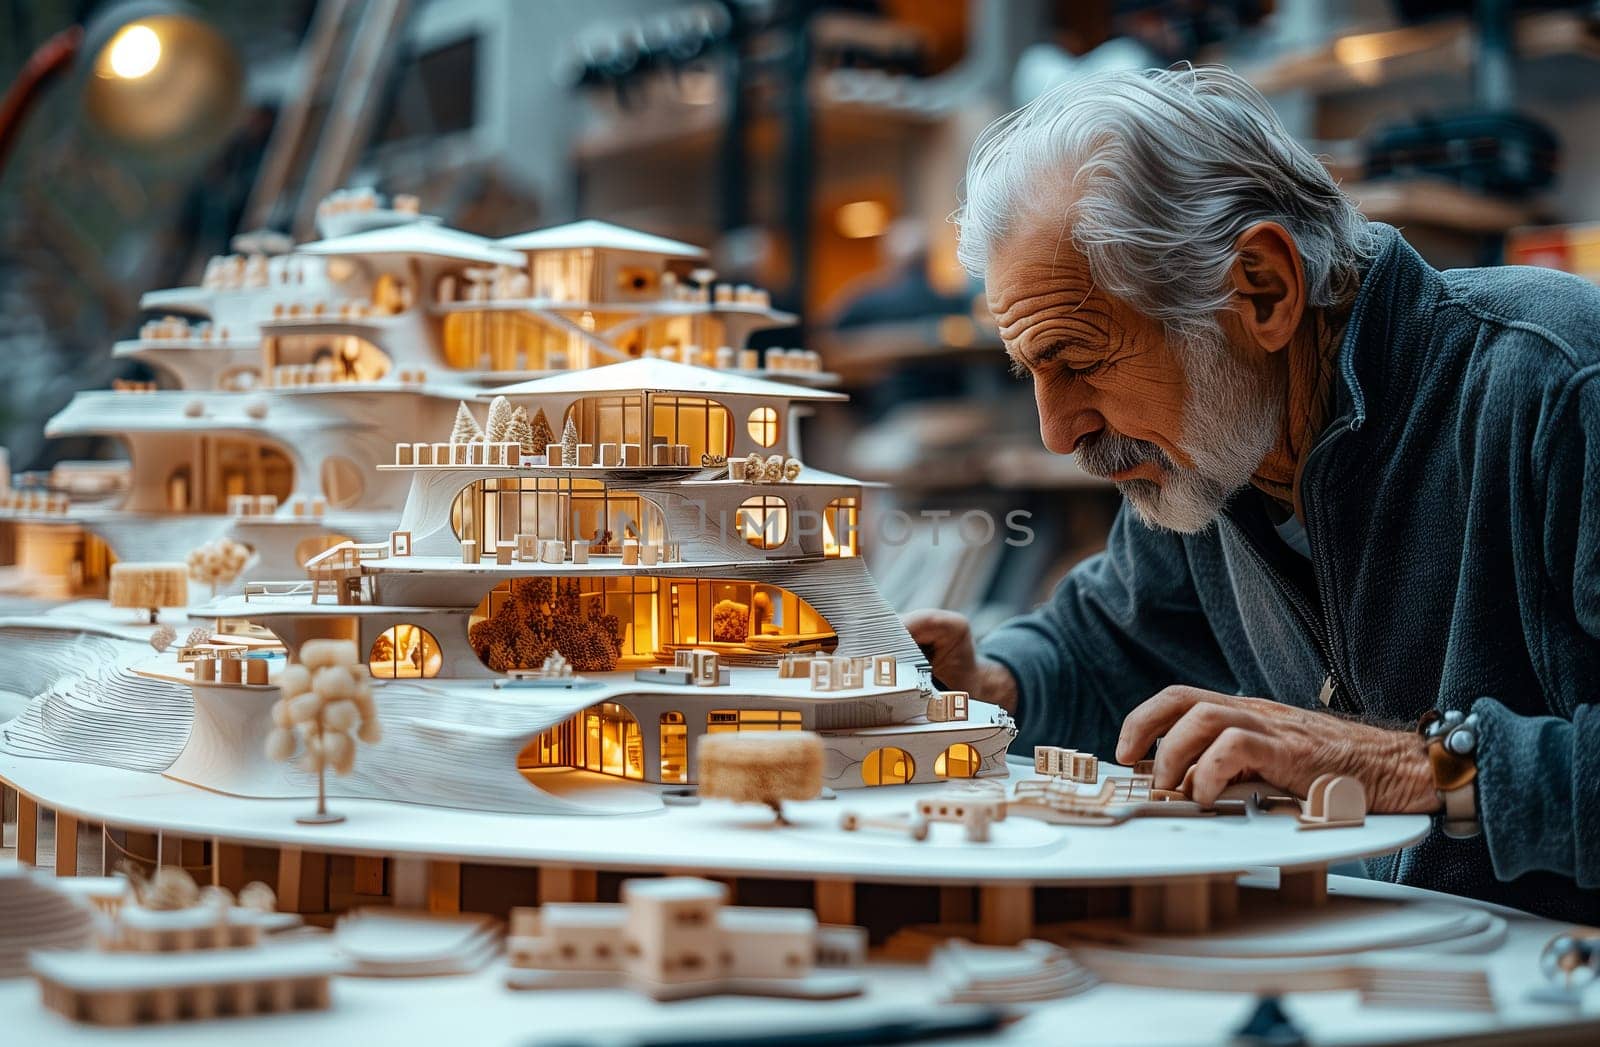 An elder gentleman is crafting a miniature city at the table. His artistry transcends cuisine, creating a delicacy for the eyes